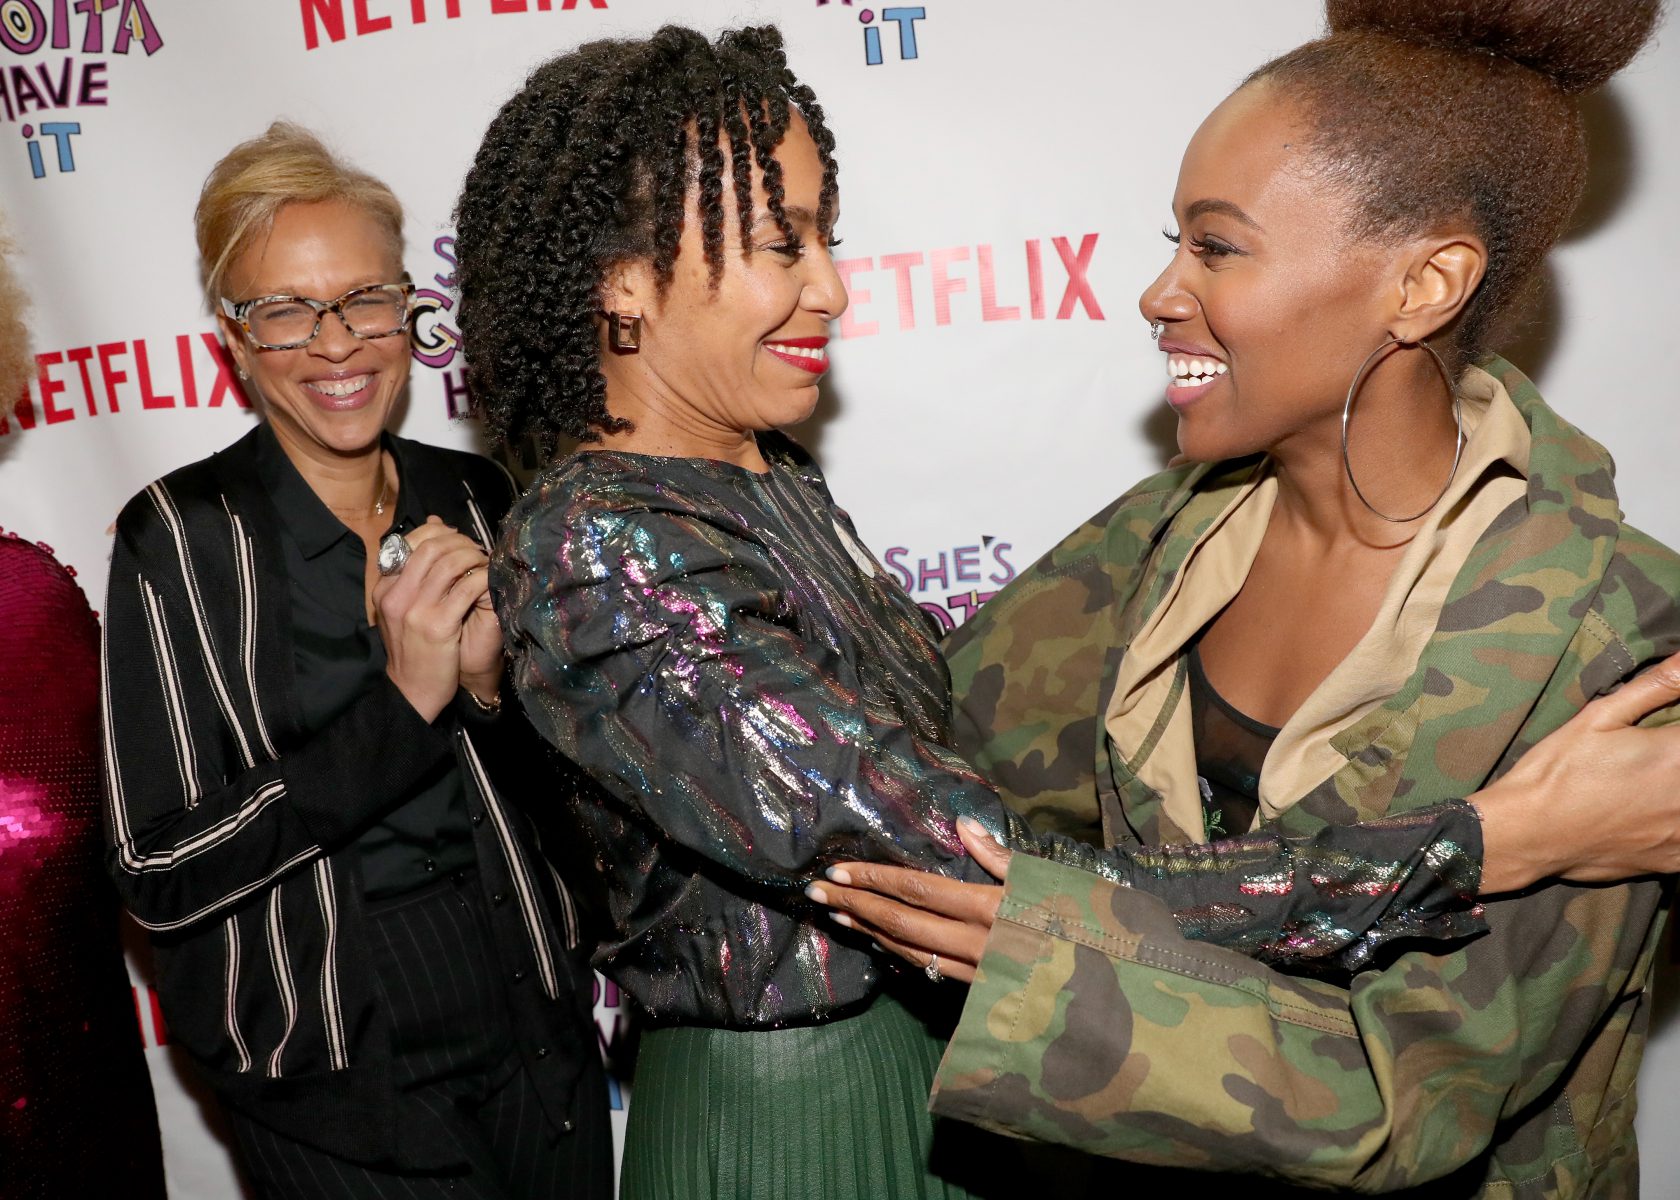 Netflix Original Series 'Shes Gotta Have It' Special Screening and Panel Discussion at IFC Center